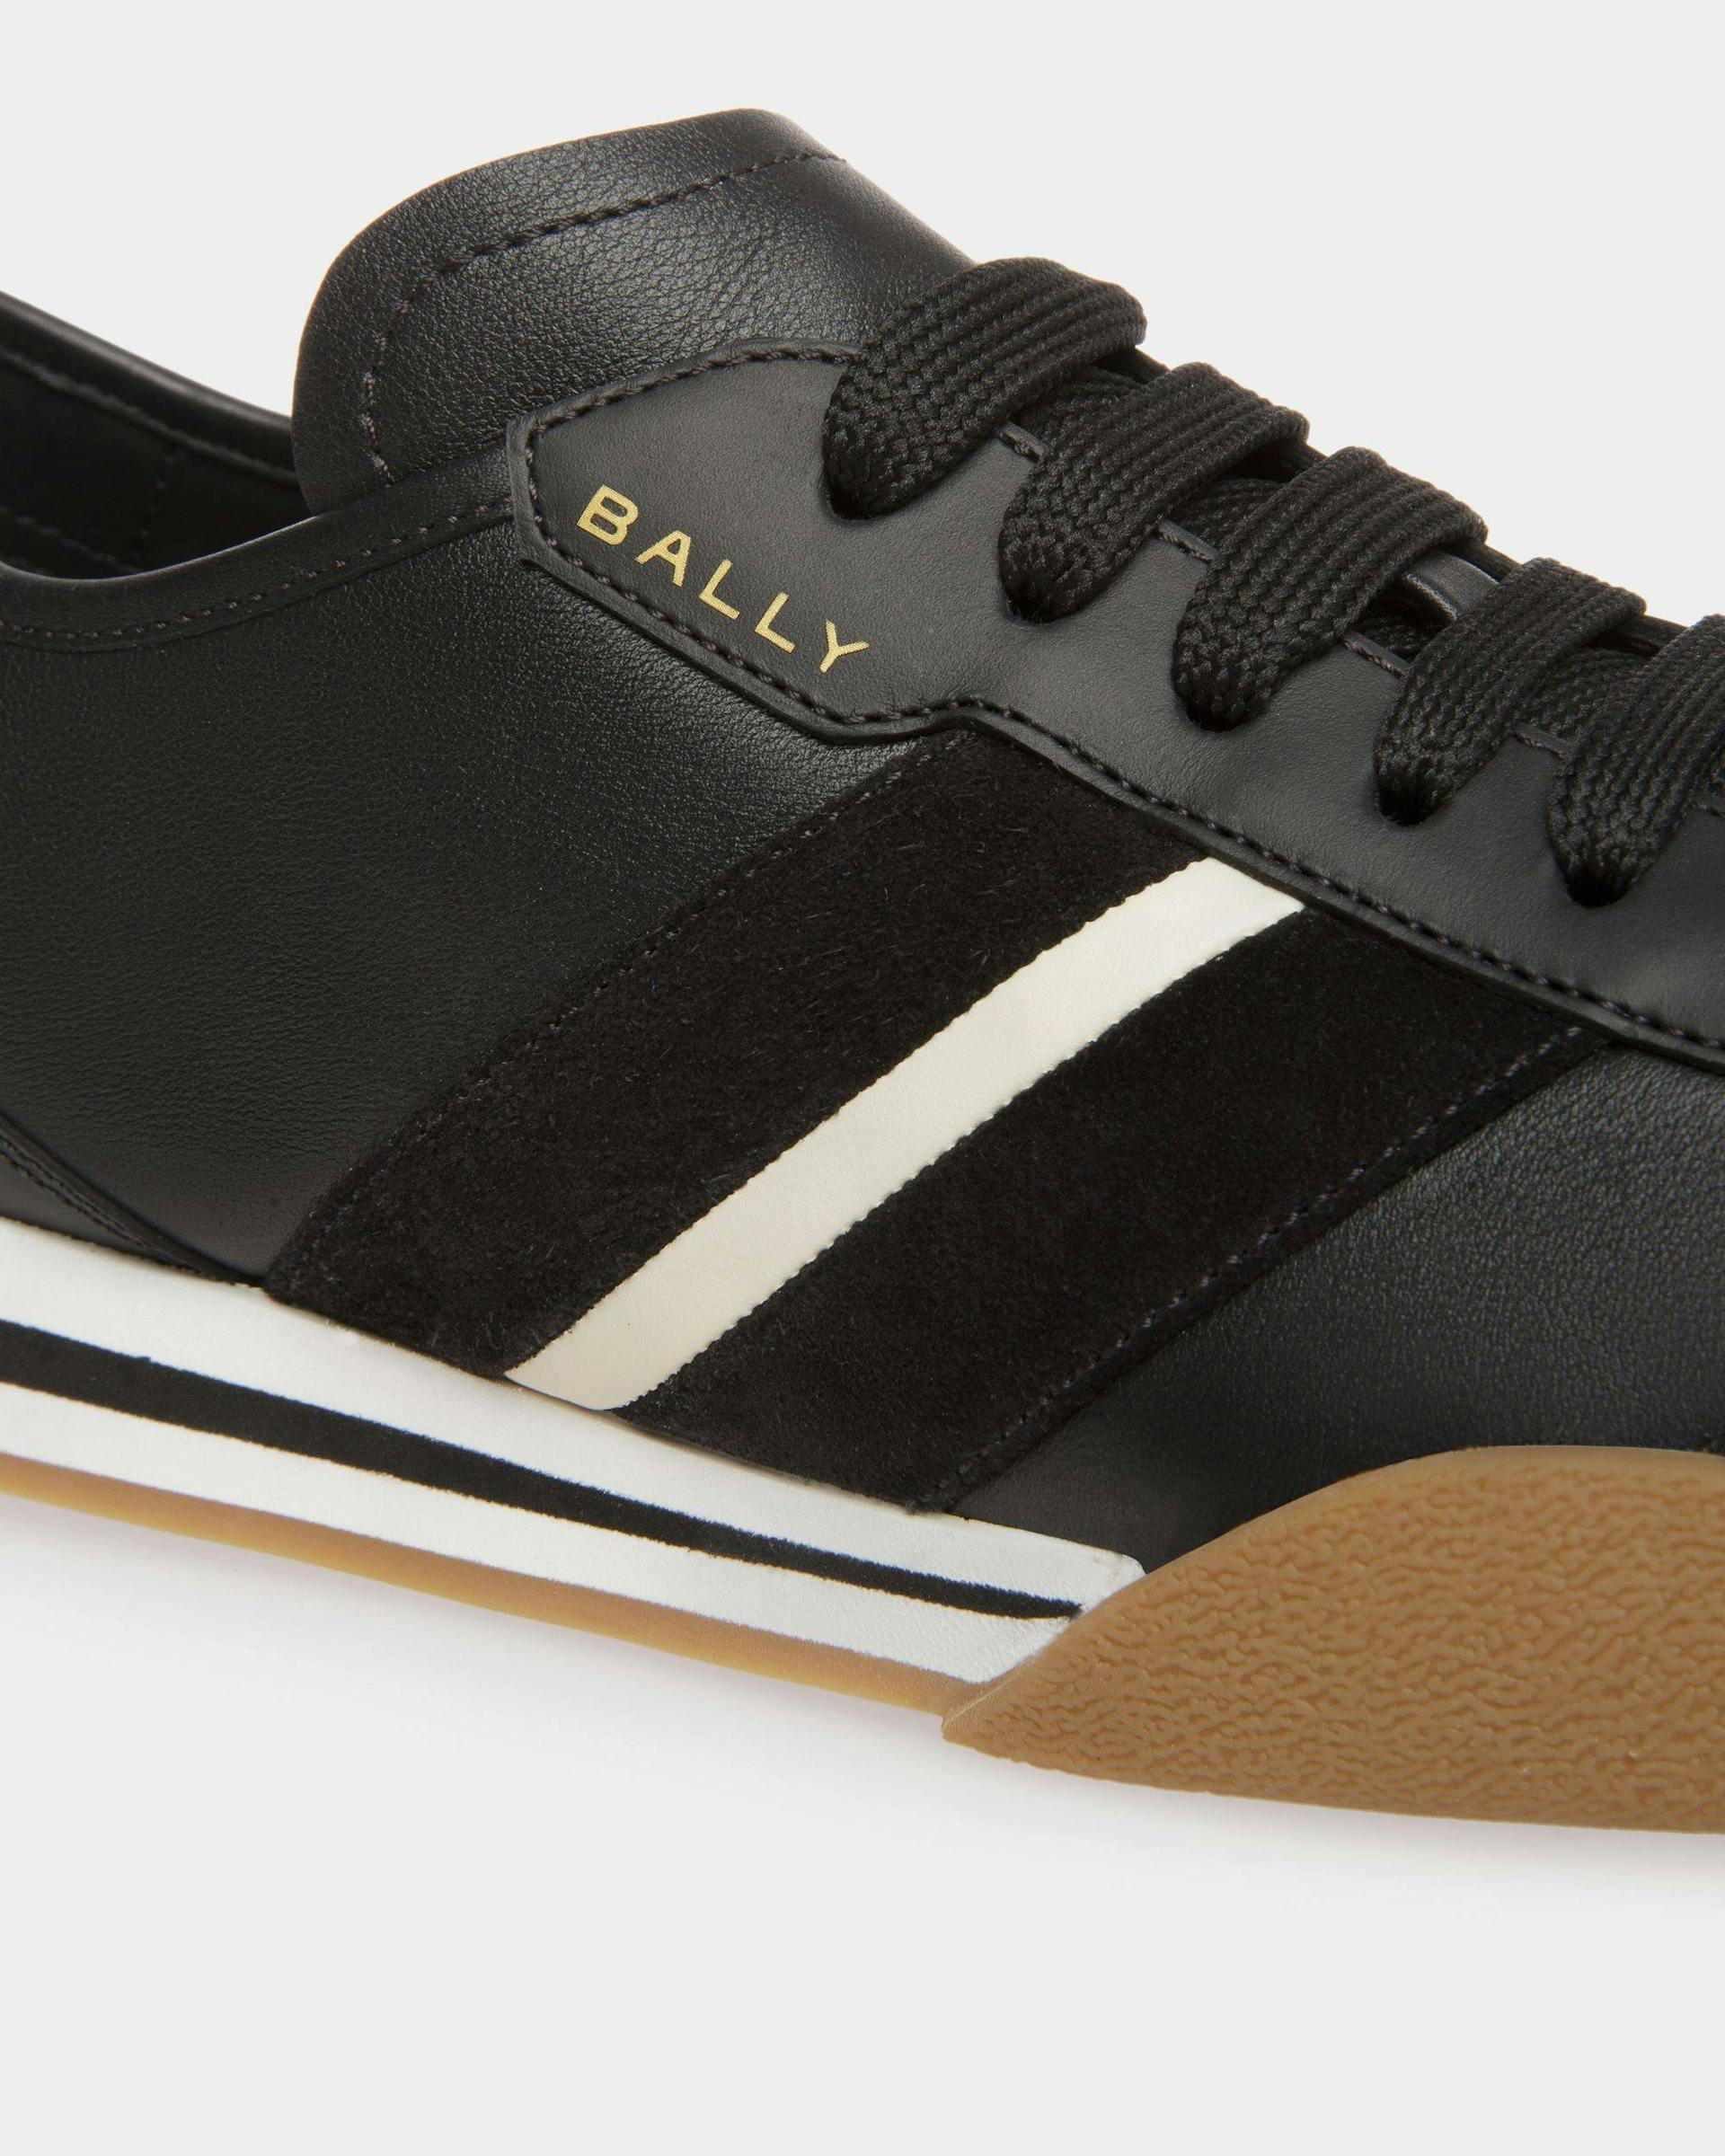 Men's Sussex Sneakers In Black, Bone And Deep Ruby Leather | Bally | Still Life Detail